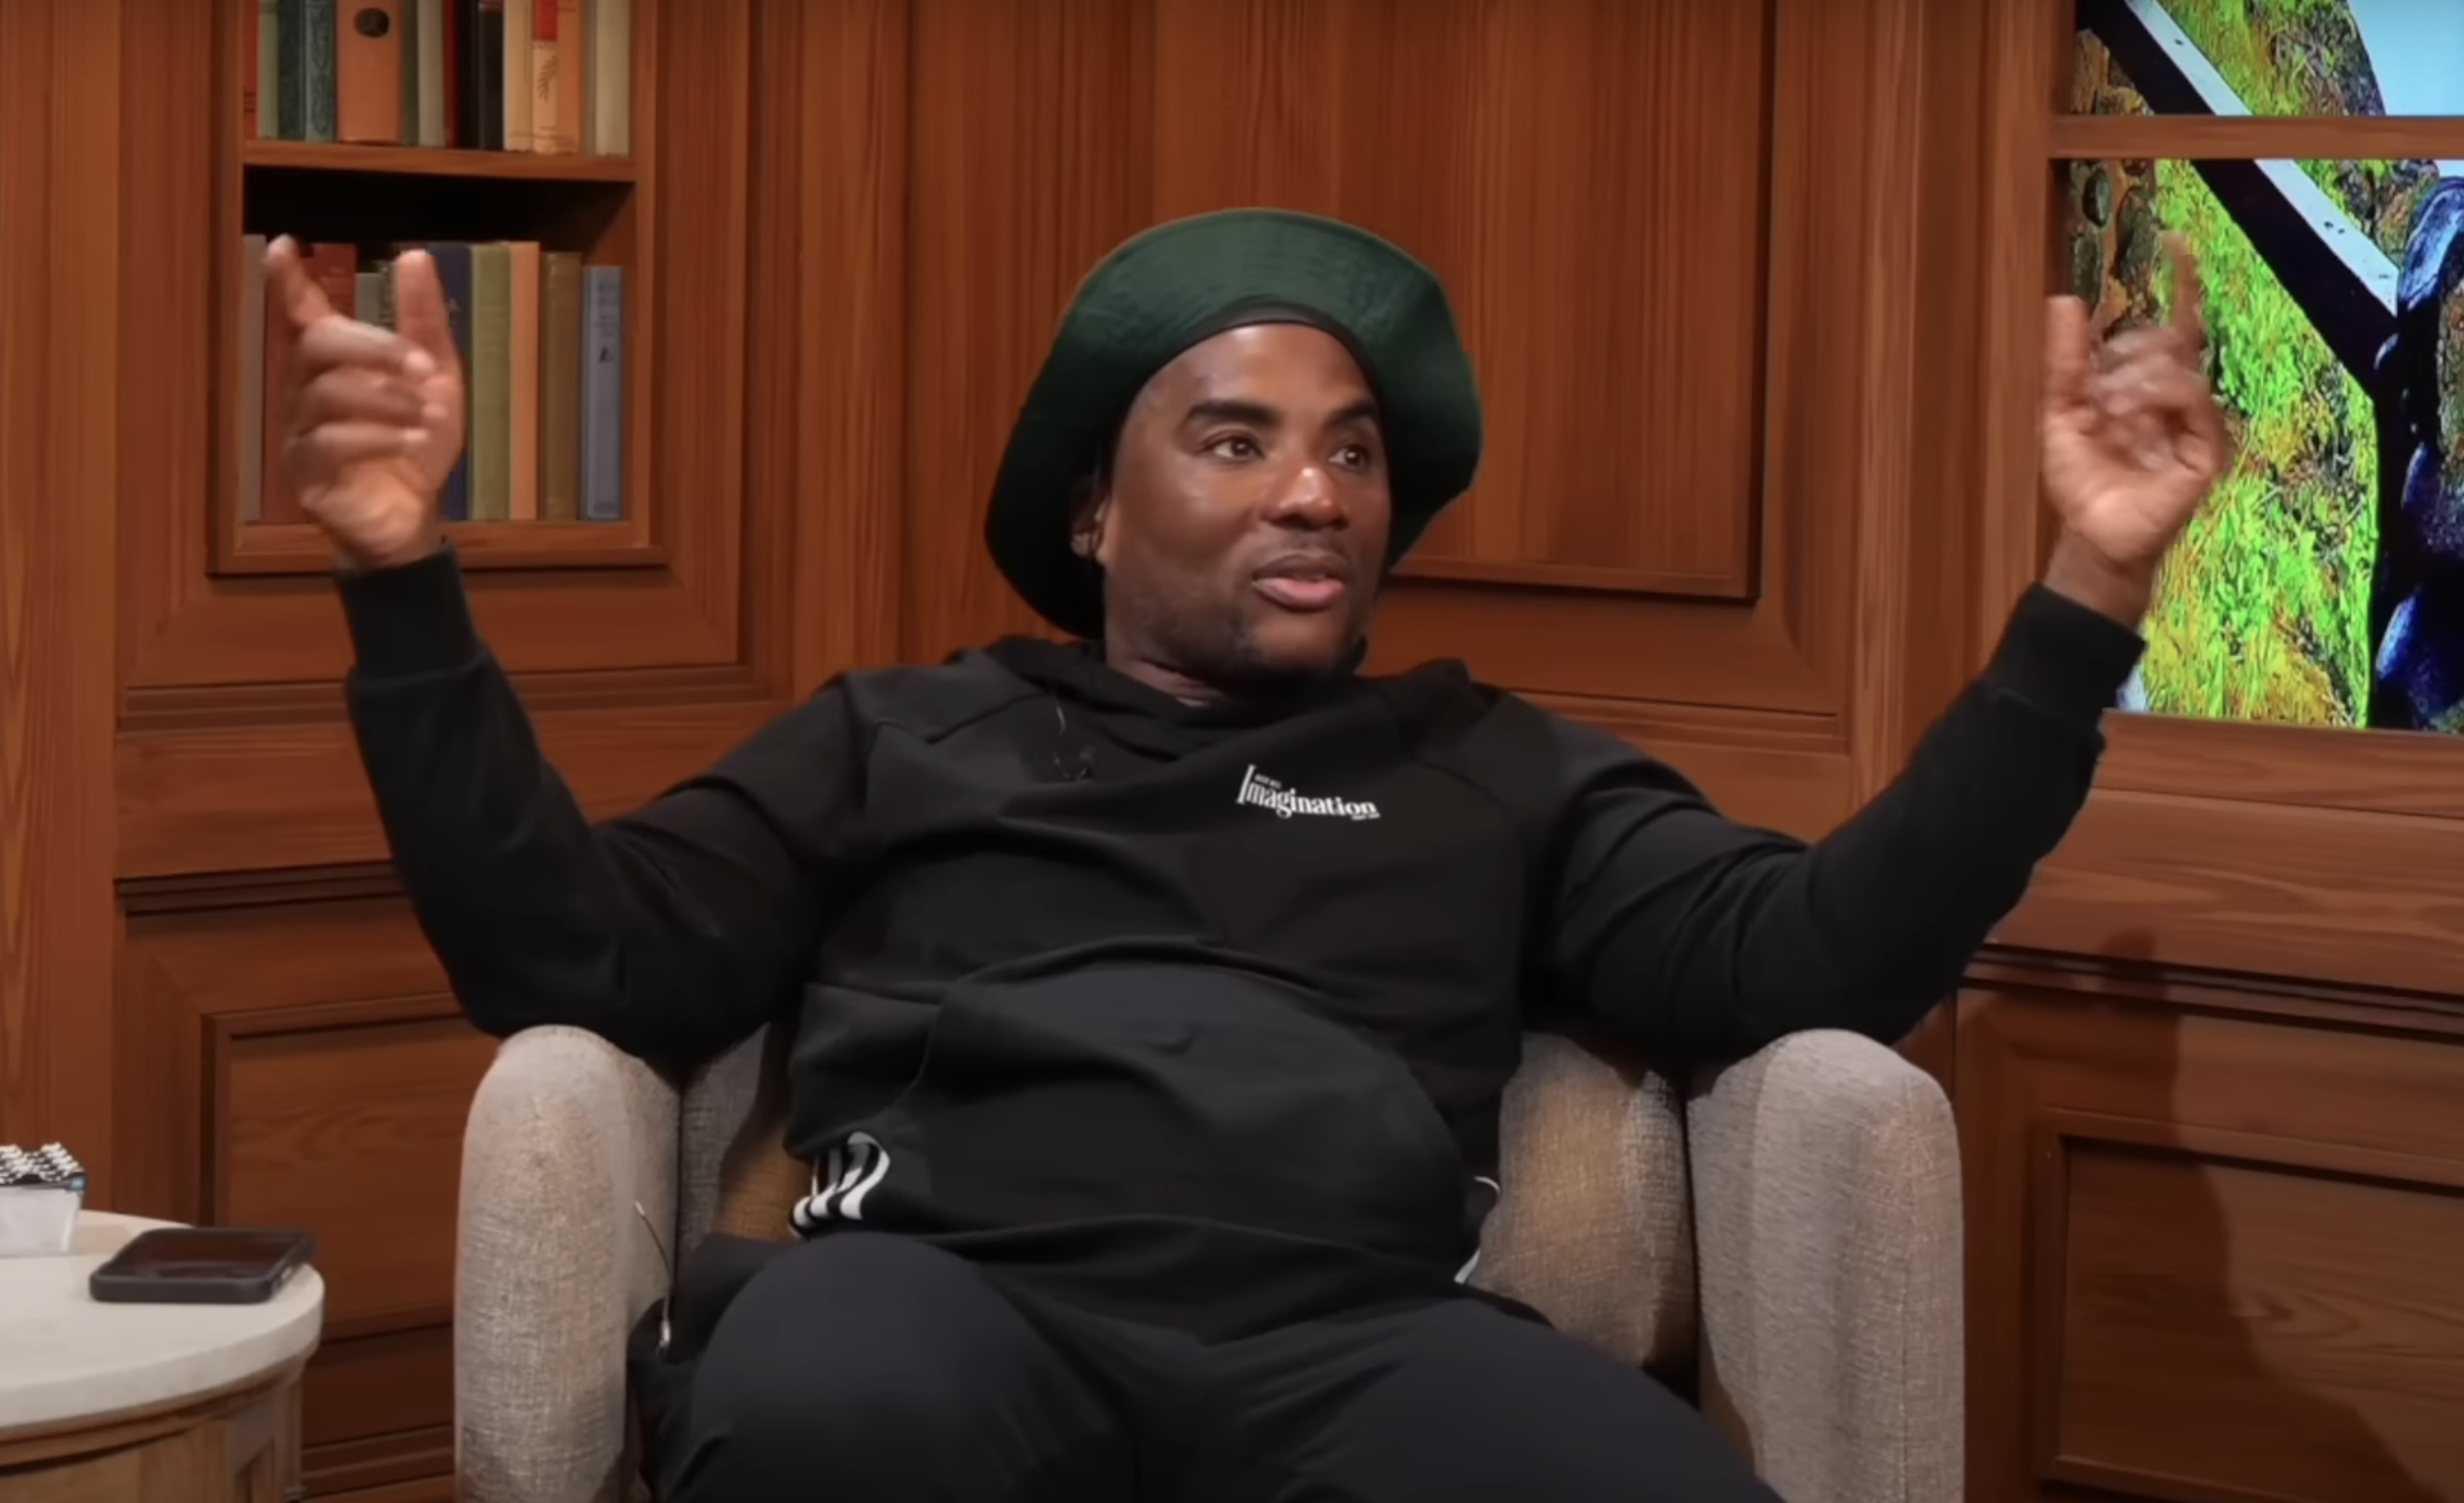 Charlamagne gesturing with hands up, wearing a beret and hooded sweatshirt, sitting indoors